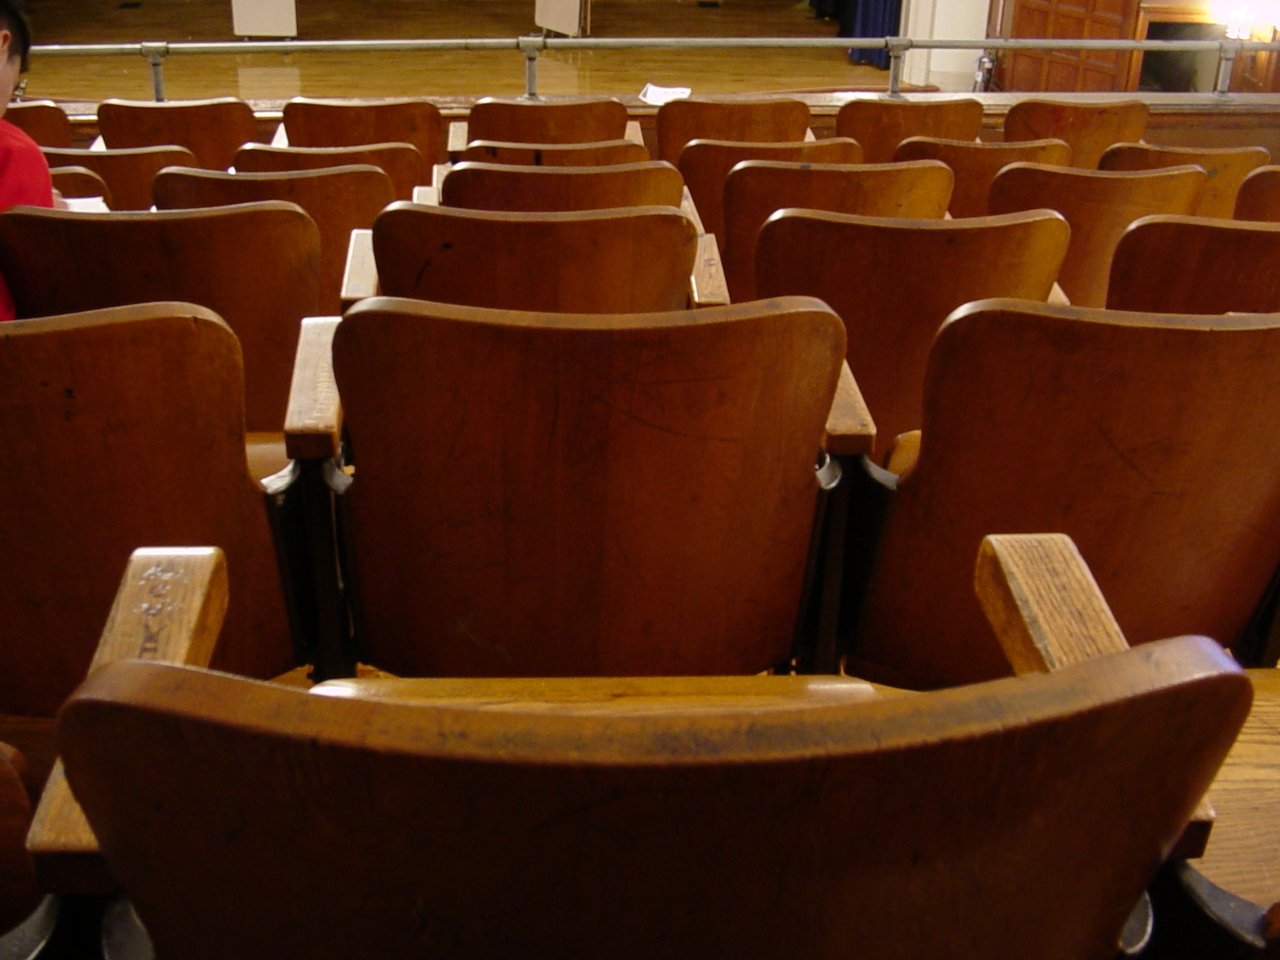 rows of empty seats are arranged at the front of the auditorium